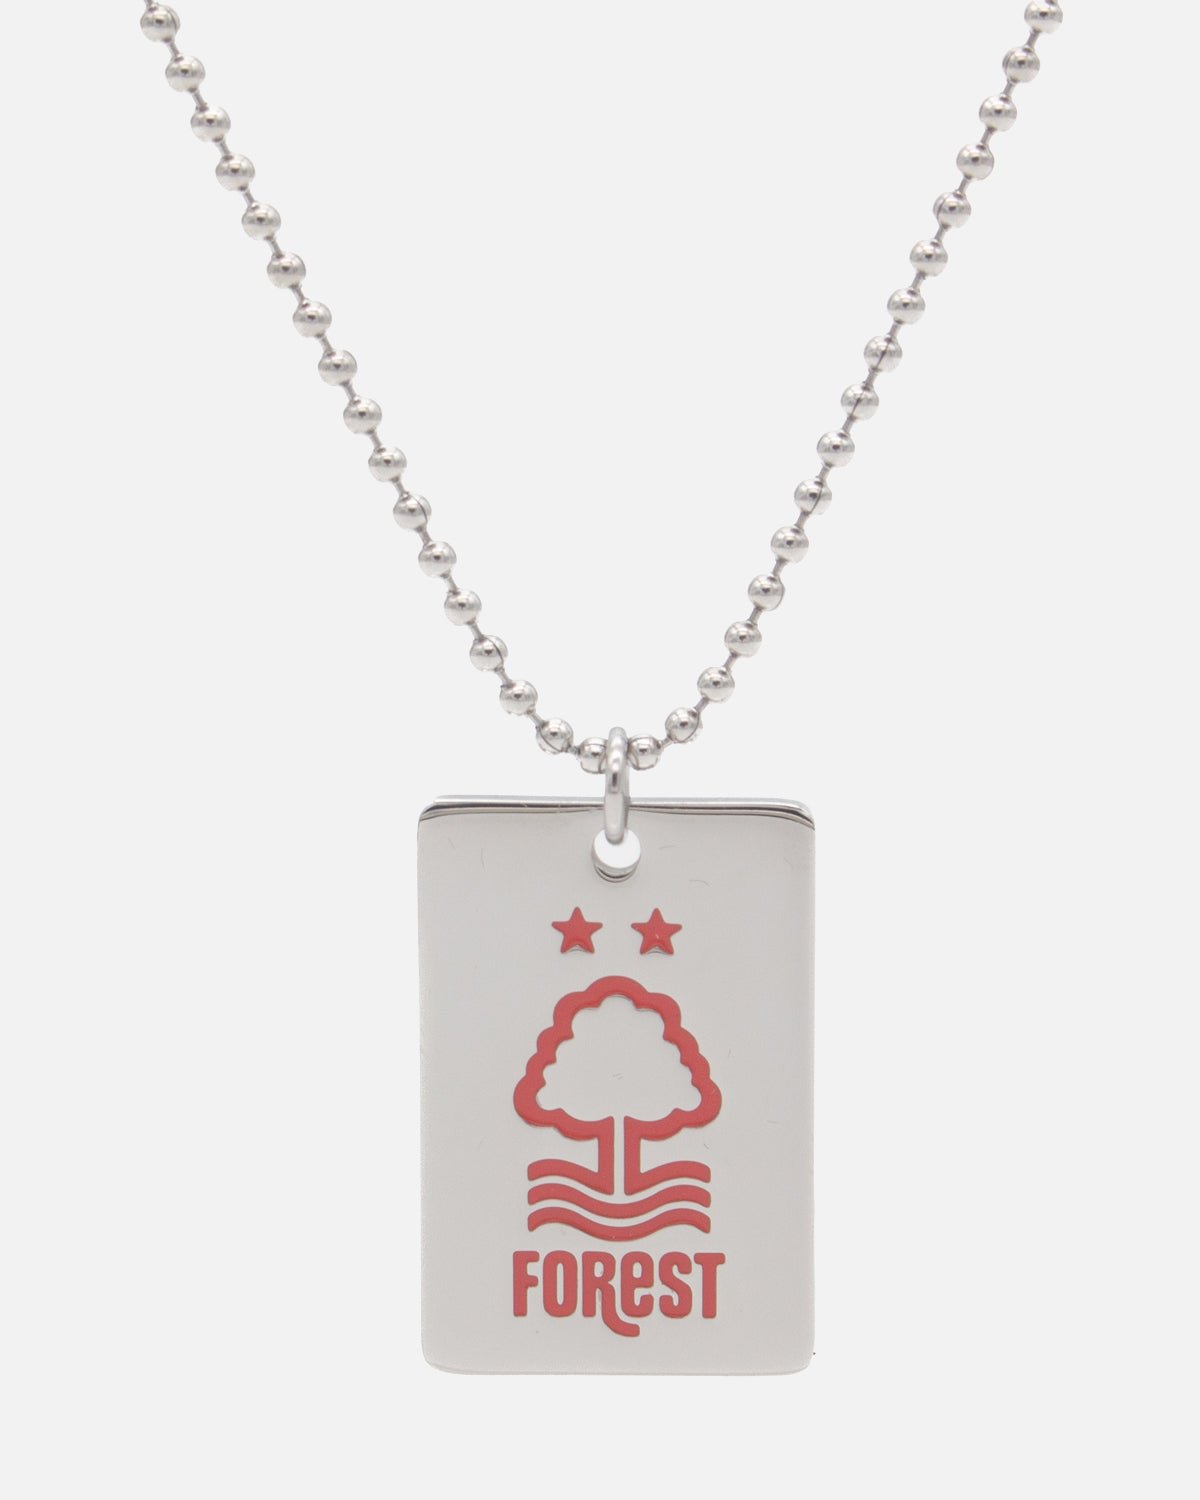 NFFC Crest Dog Tag and Chain - Nottingham Forest FC